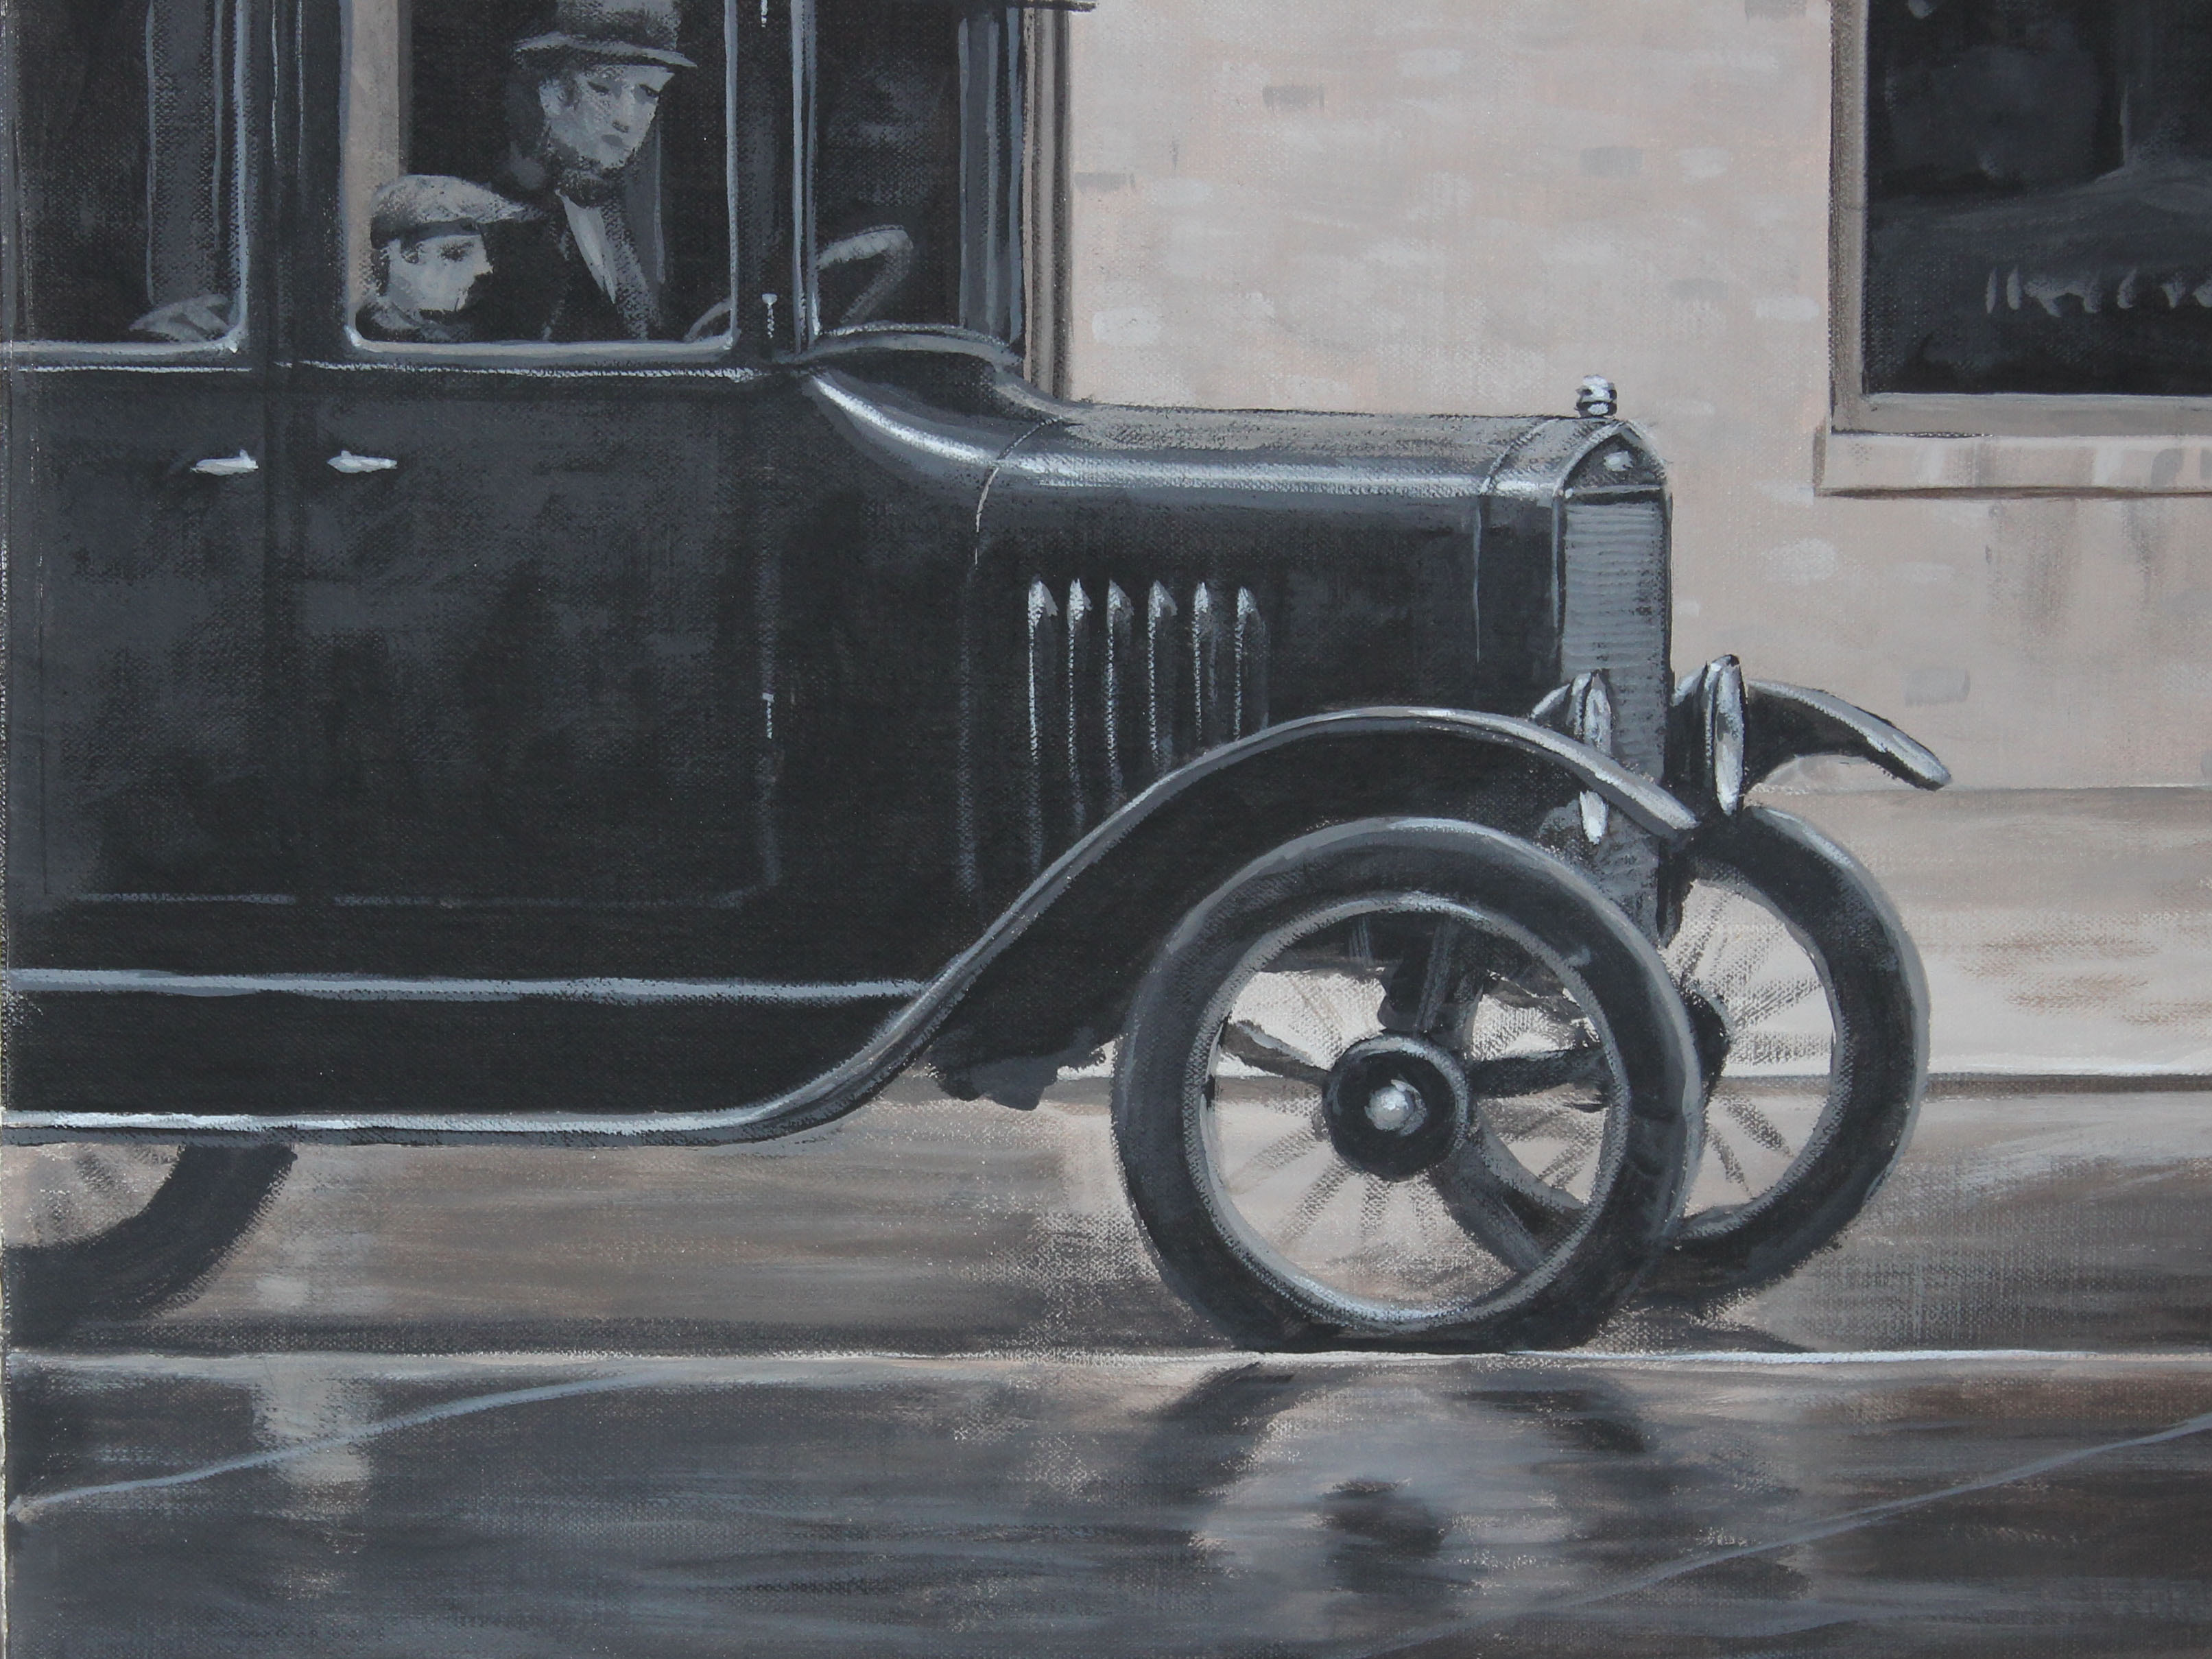 Rainy Day in Des Moines - Detail